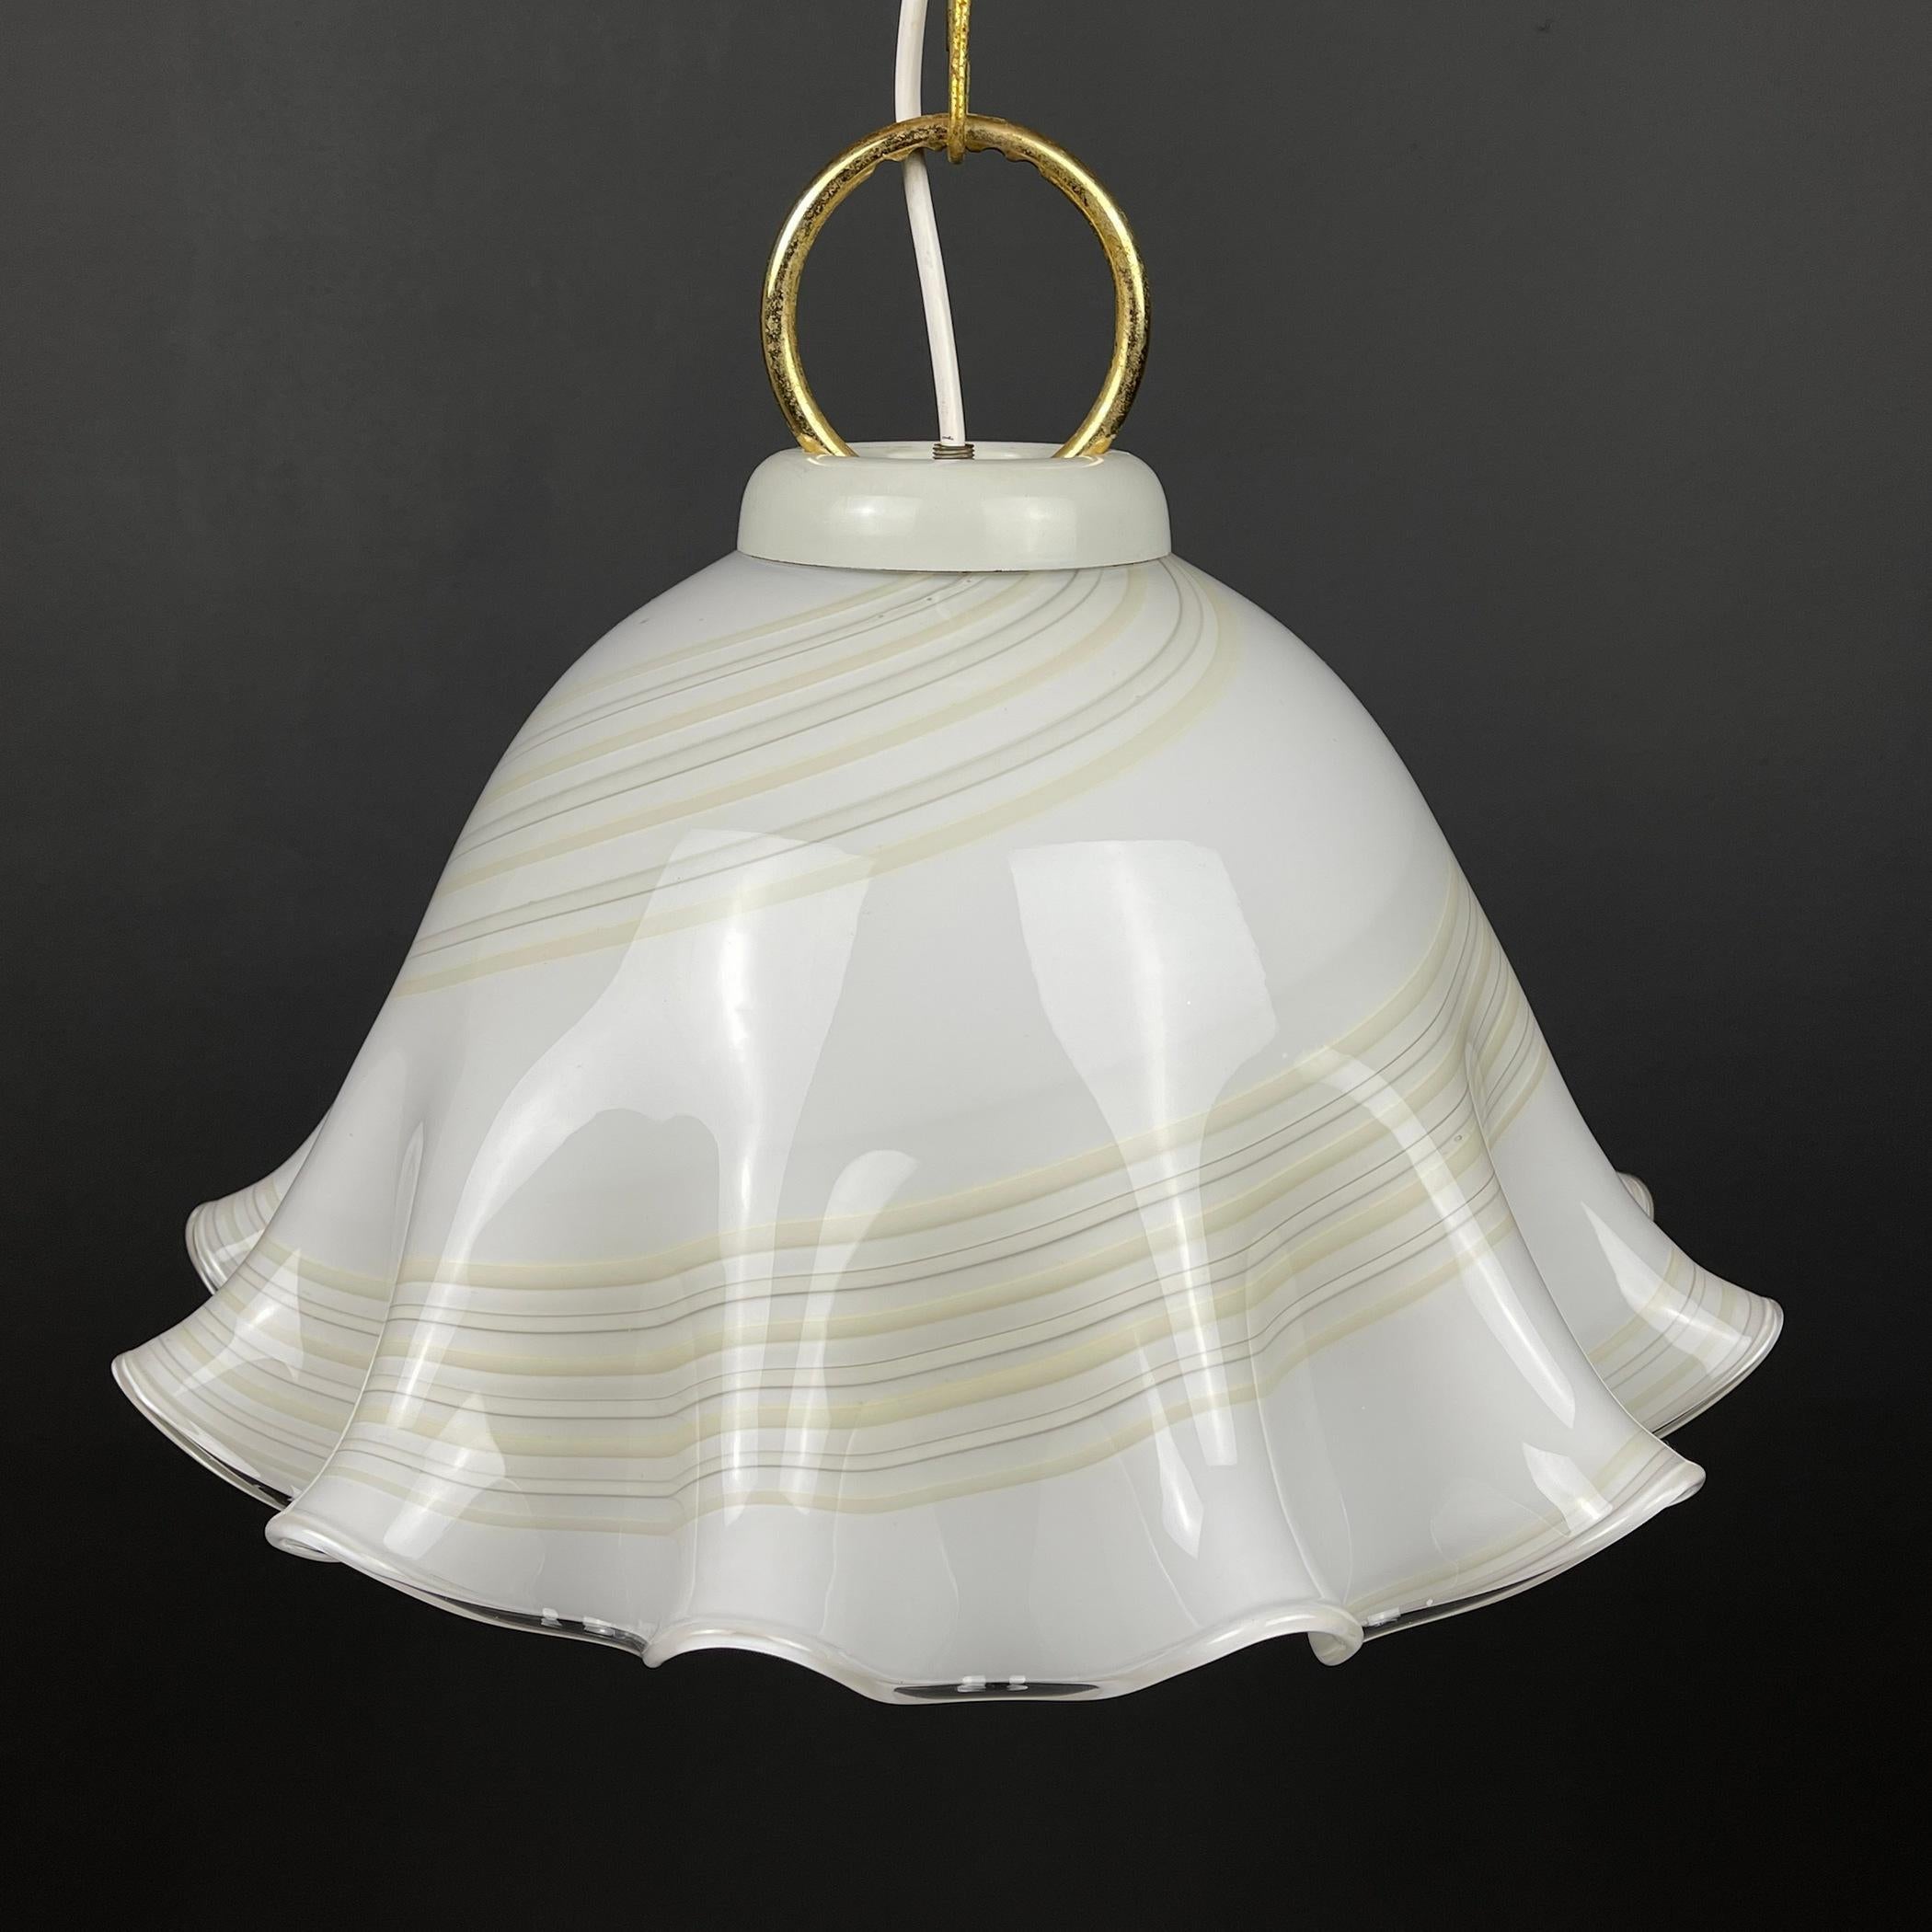 The beautiful murano glass chandelier fazzoletto made in Italy in the 70s. Despite its weight, the chandelier looks very airy and delicate. It will undoubtedly decorate your home and will delight you for many years. Very good vintage condition.